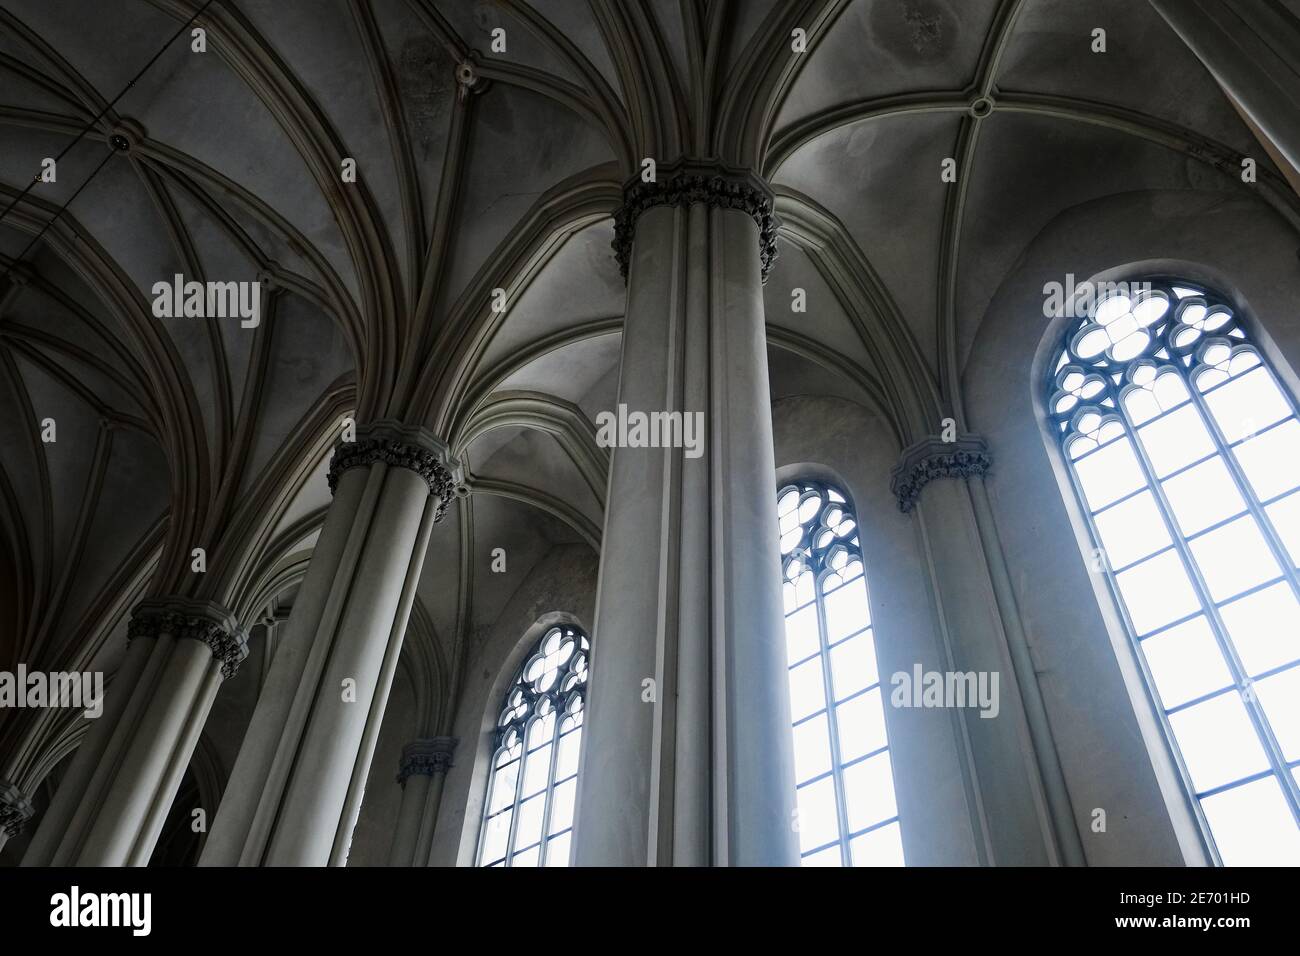 Lviv, Ukraine - February, 2018: View of gothic medieval cathedral interior with columns and large windows. The Church of Sts. Olha and Elizabeth Stock Photo